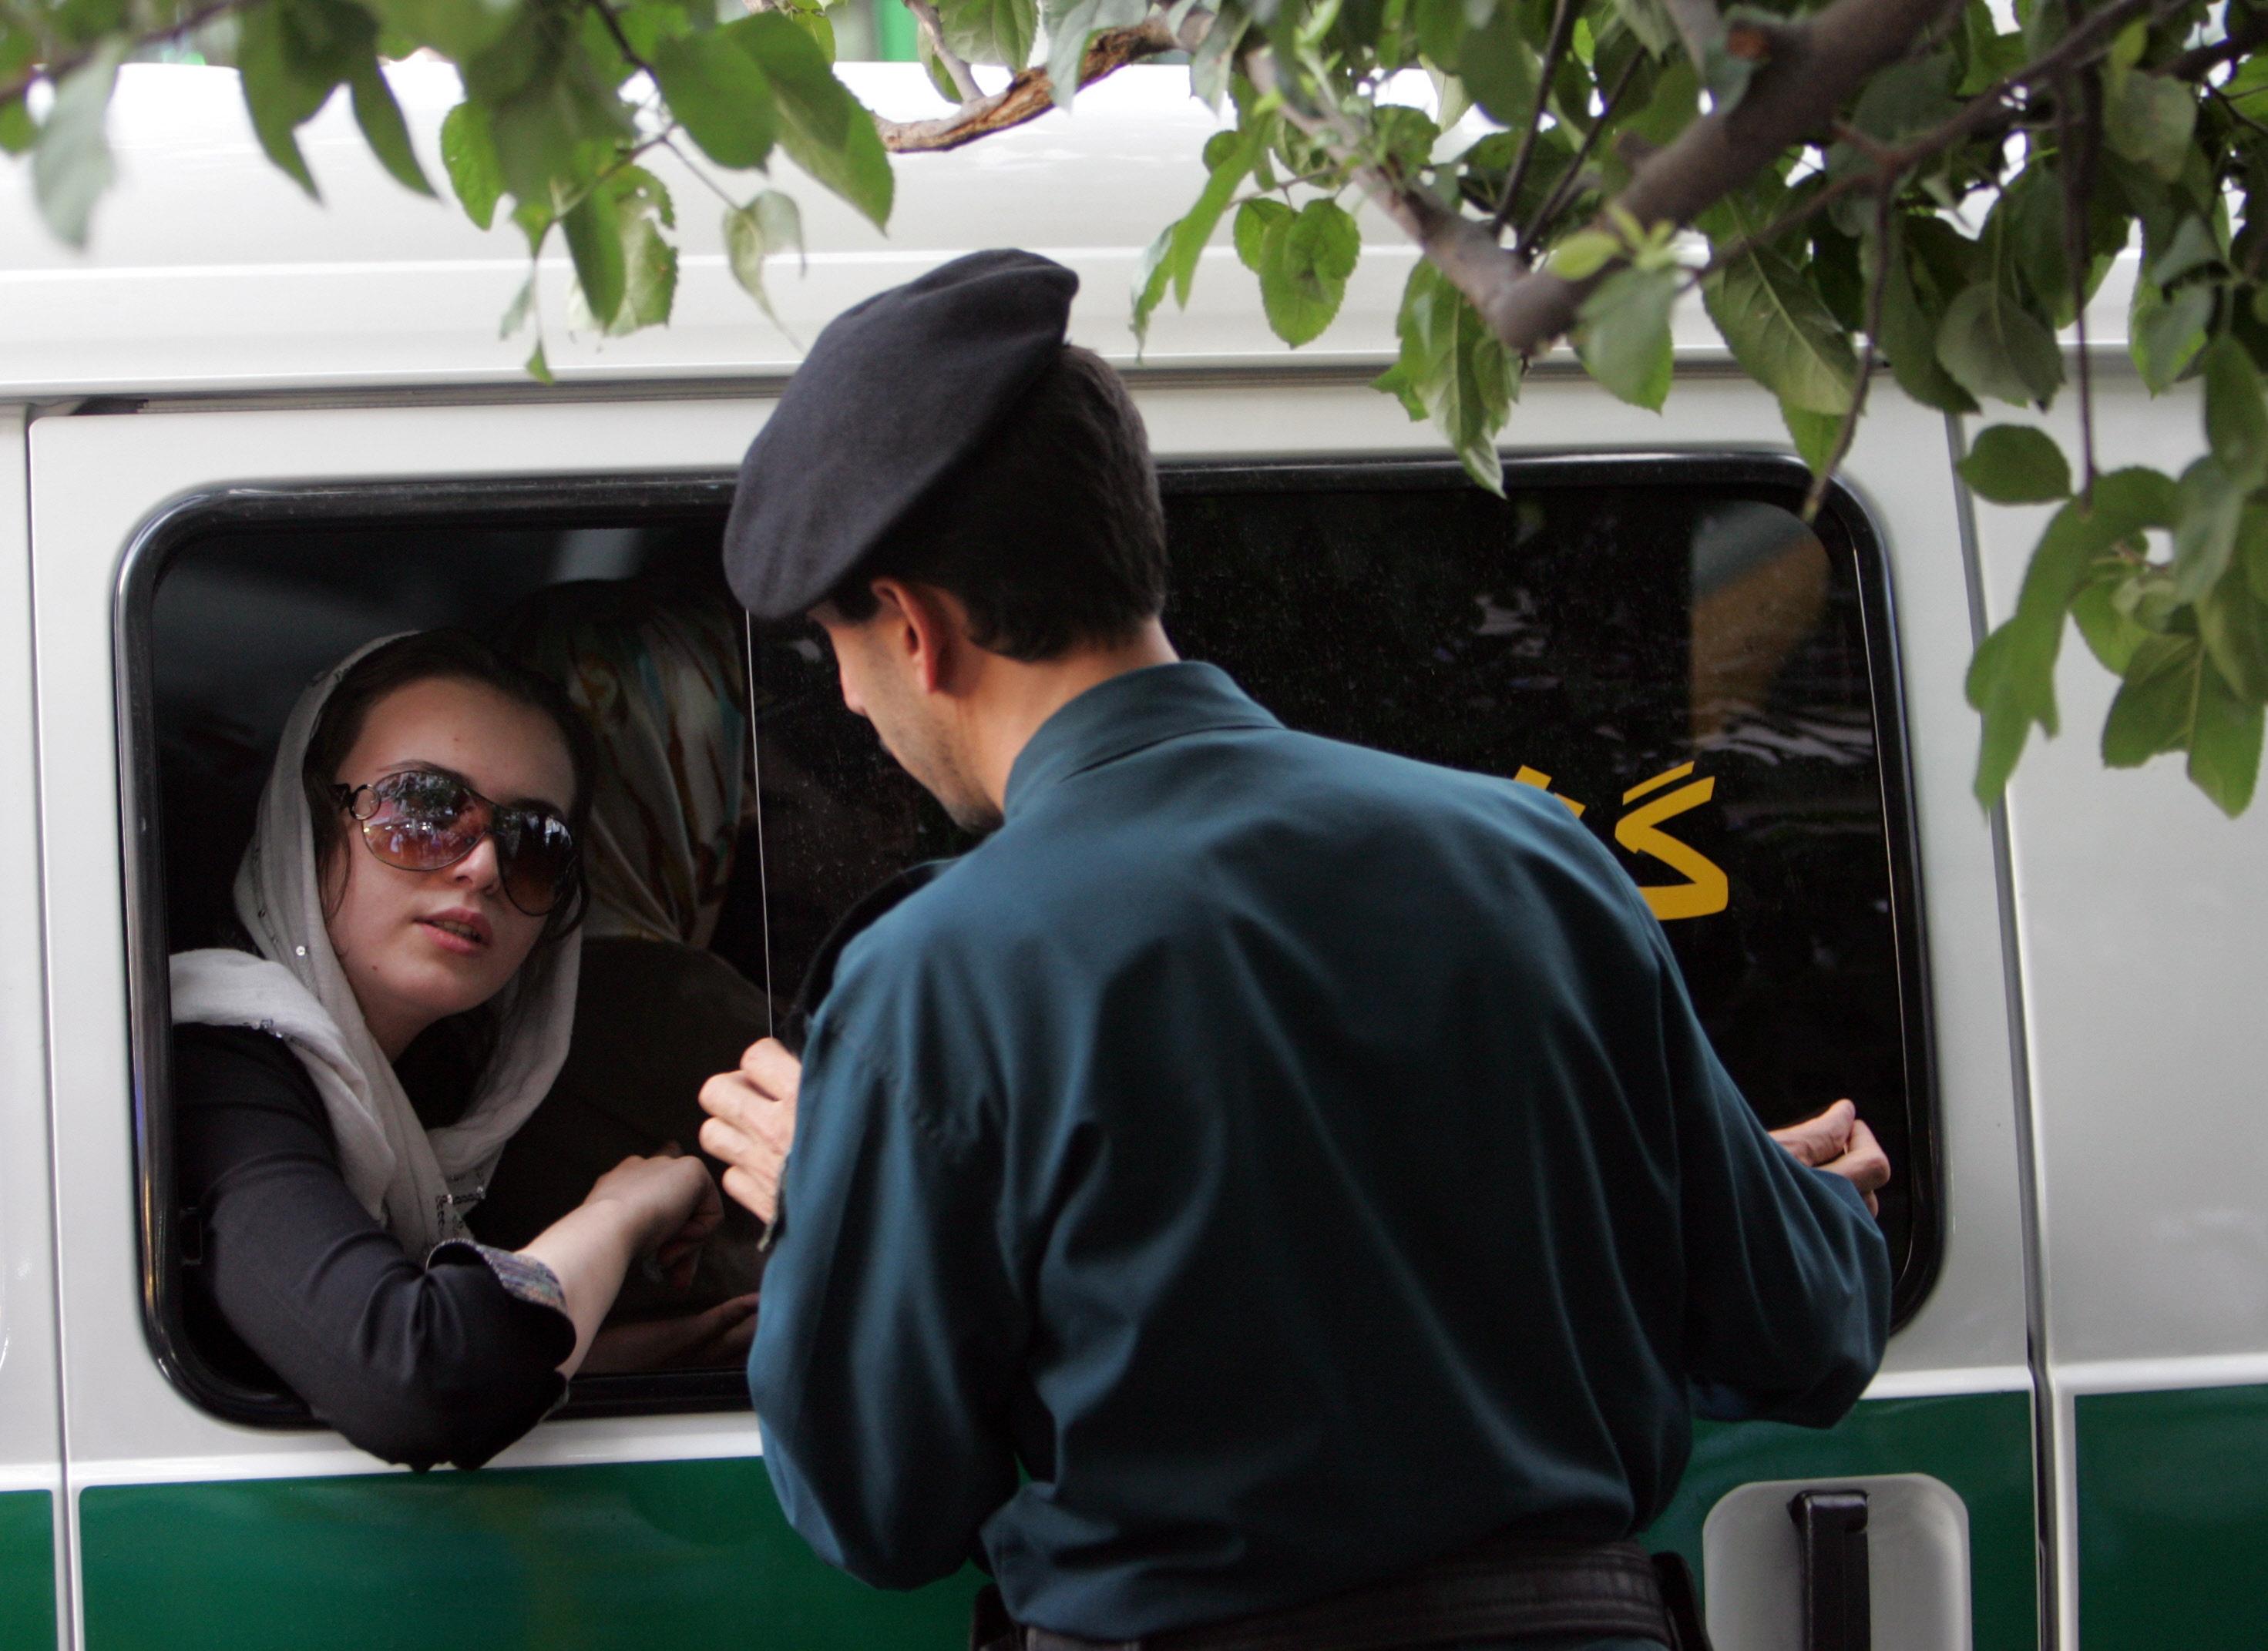 In this file photo taken on July 23, 2007, an Iranian policeman speaks with a woman siting in a police car after she was arrested because of her "inappropriate" clothes during a crackdown to enforce Islamic dress code in the capital Tehran. - Iran has scrapped its morality police after more than two months of protests triggered by the arrest of Mahsa Amini for allegedly violating the country's strict female dress code, local media said on December 4, 2022. (Photo by Behrouz MEHRI / AFP)